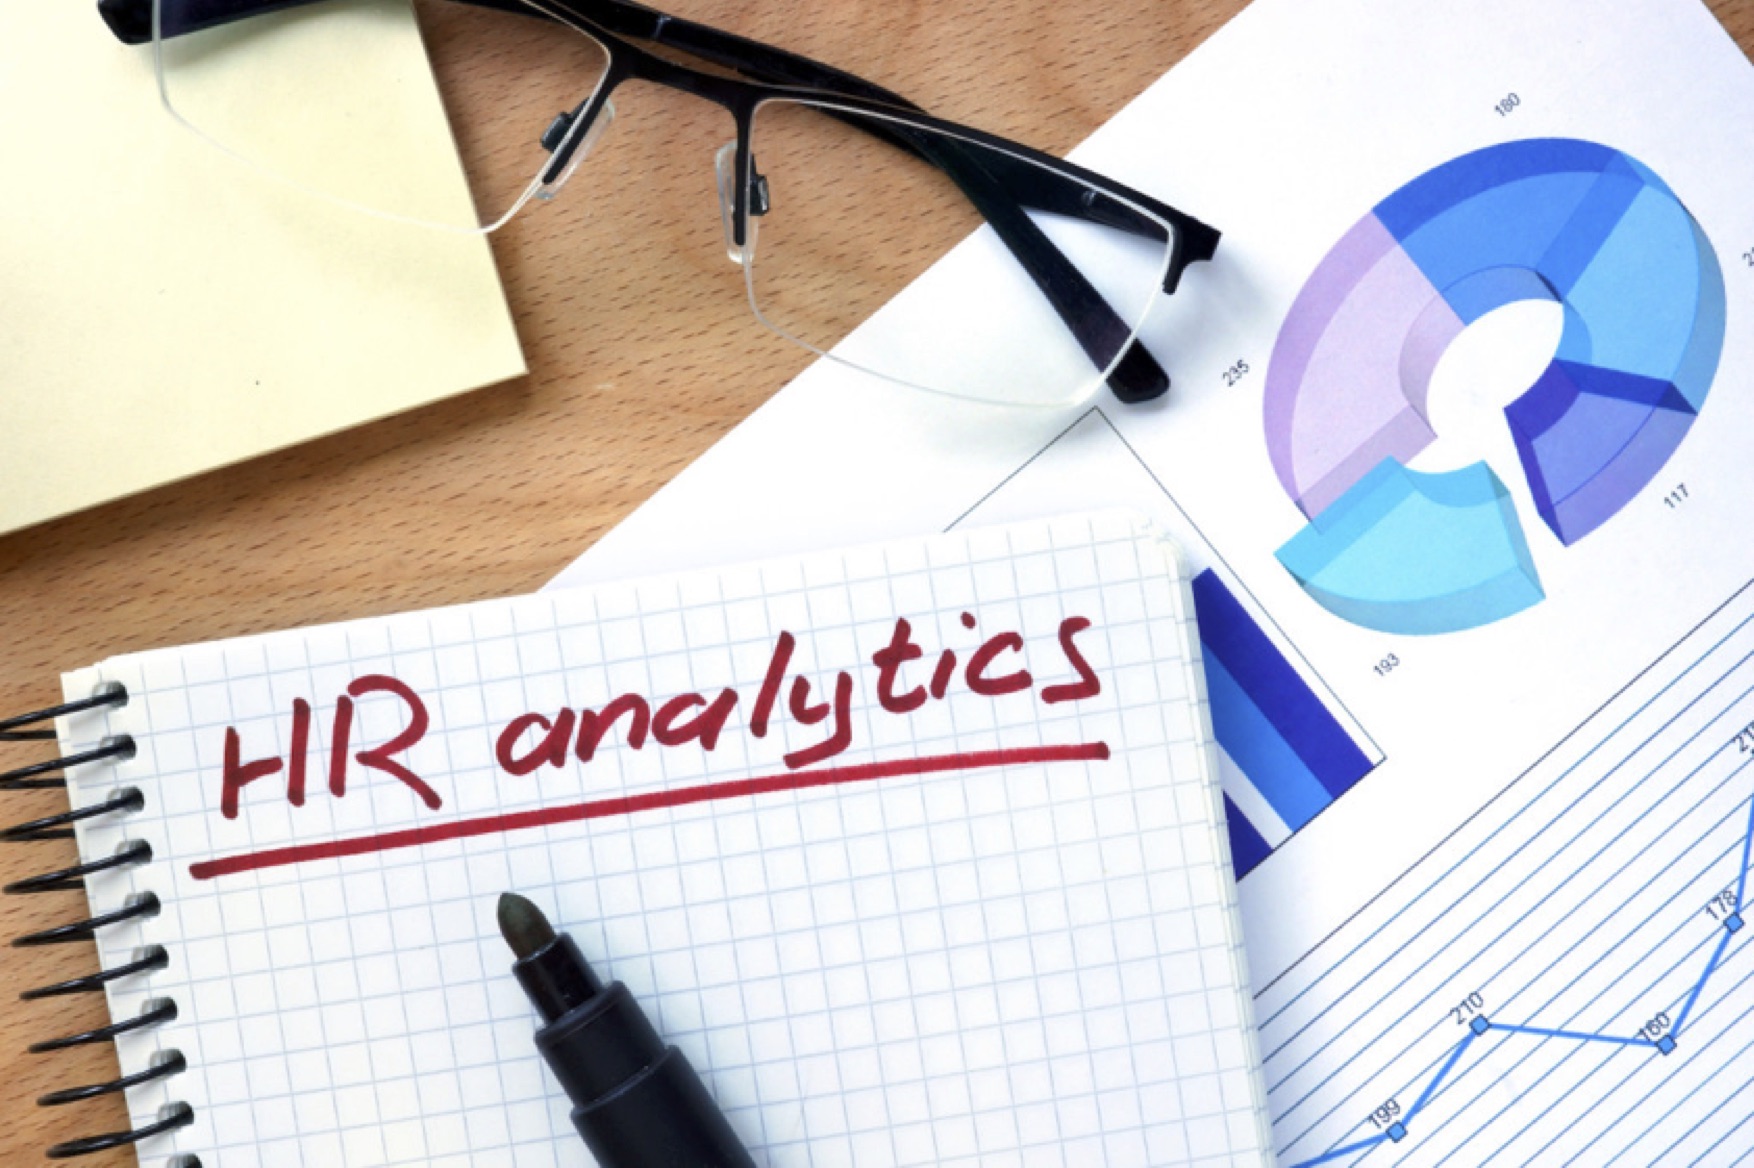 How To Implement And Use HR Analytics To Make Business Decisions